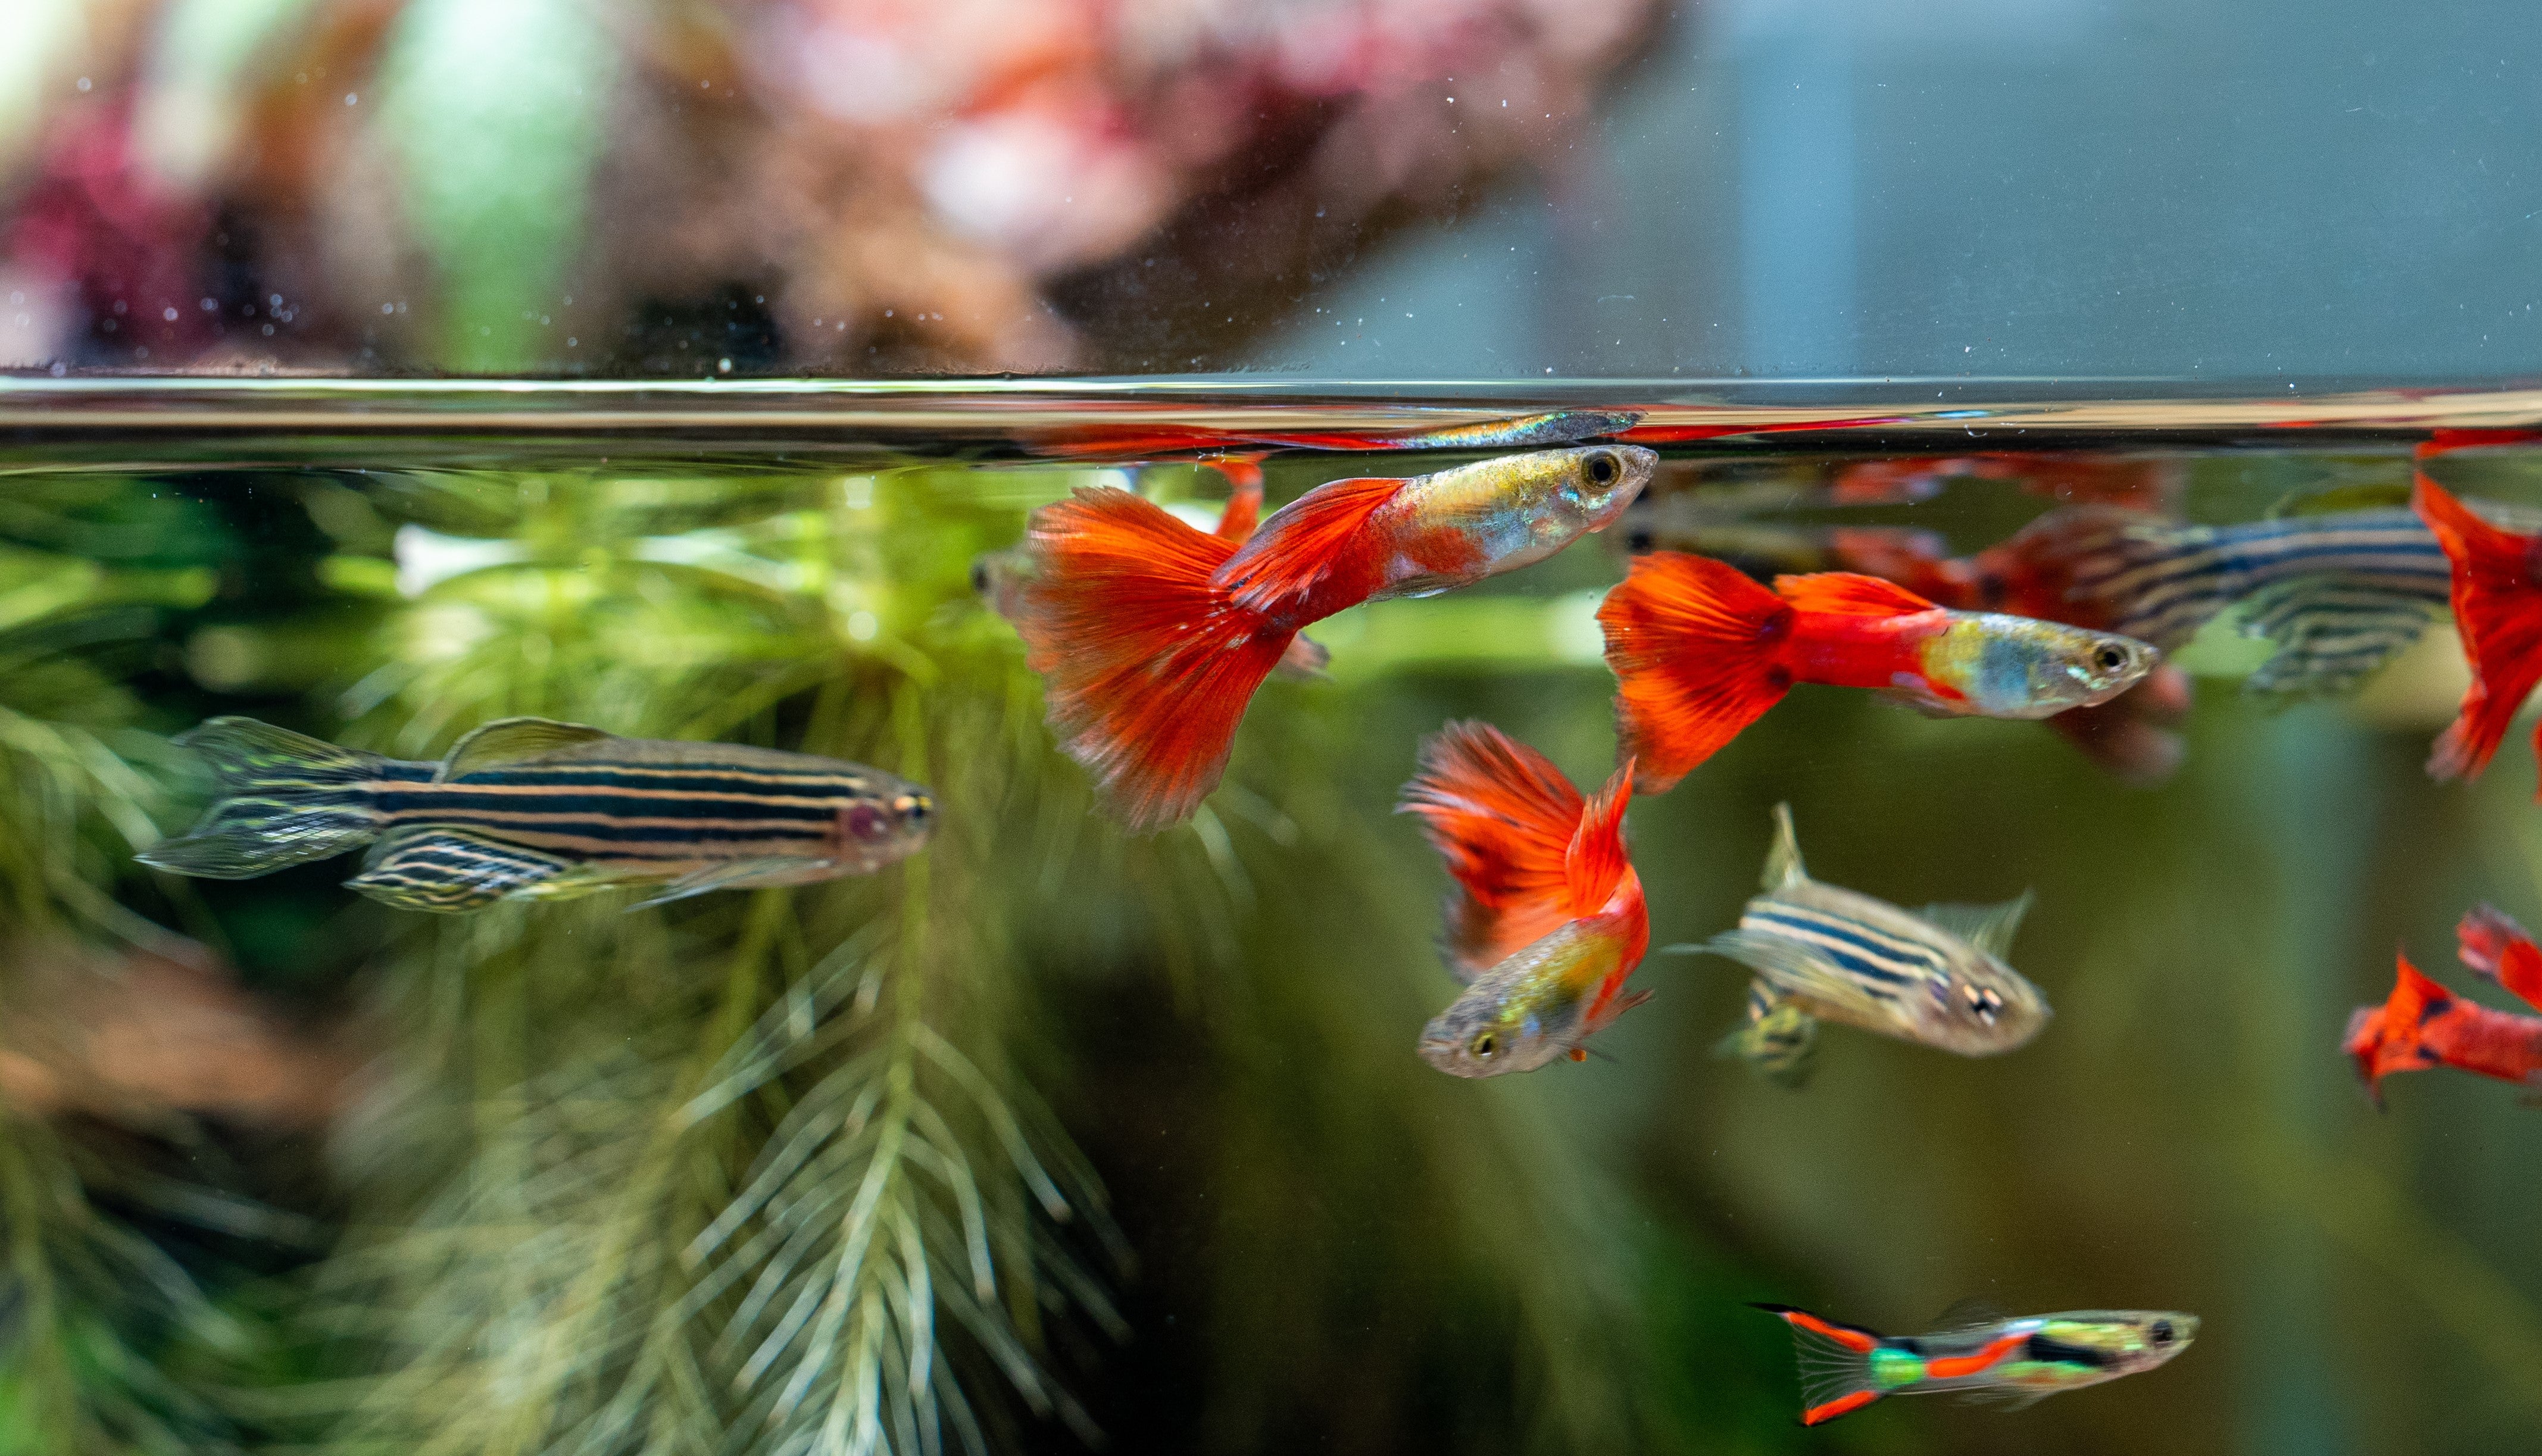 Fish Tank Cleaning Tools You Must Have - Best Fish Tank Cleaner 